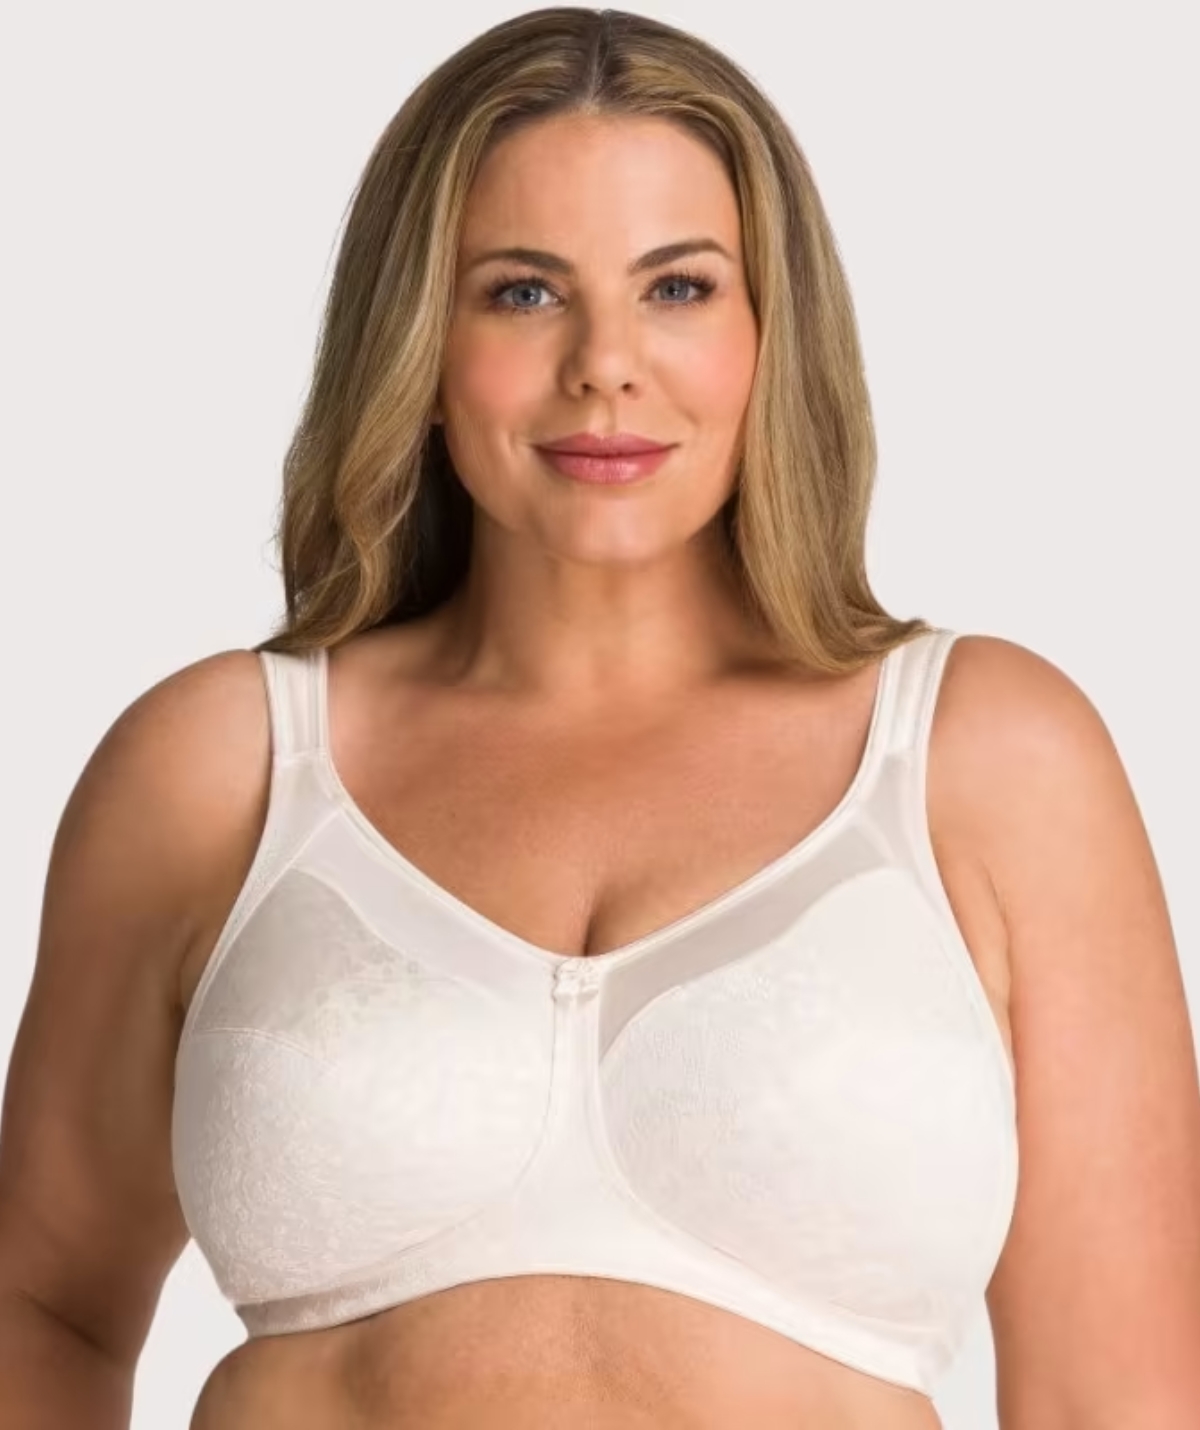 Fayreform Ultimate Comfort Front Closure Soft Cup Wire-Free Bra - Pink  Champagne